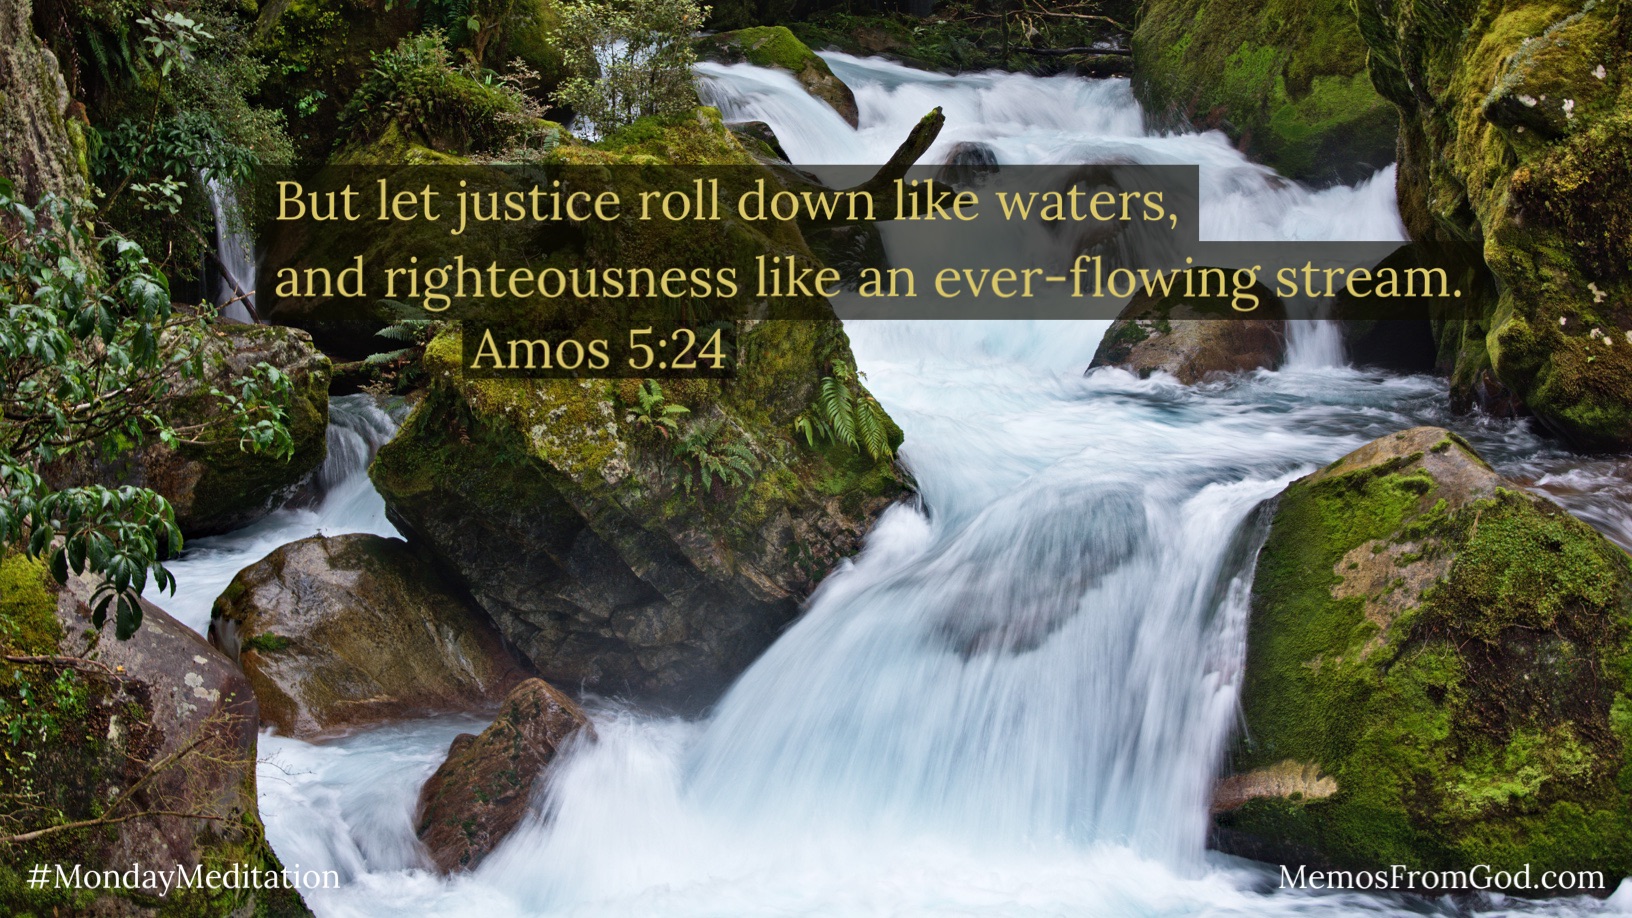 Water rushing past large moss-covered rocks in a stream. Caption: But let justice roll down like waters, and righteousness like an ever-flowing stream. Amos 5:24